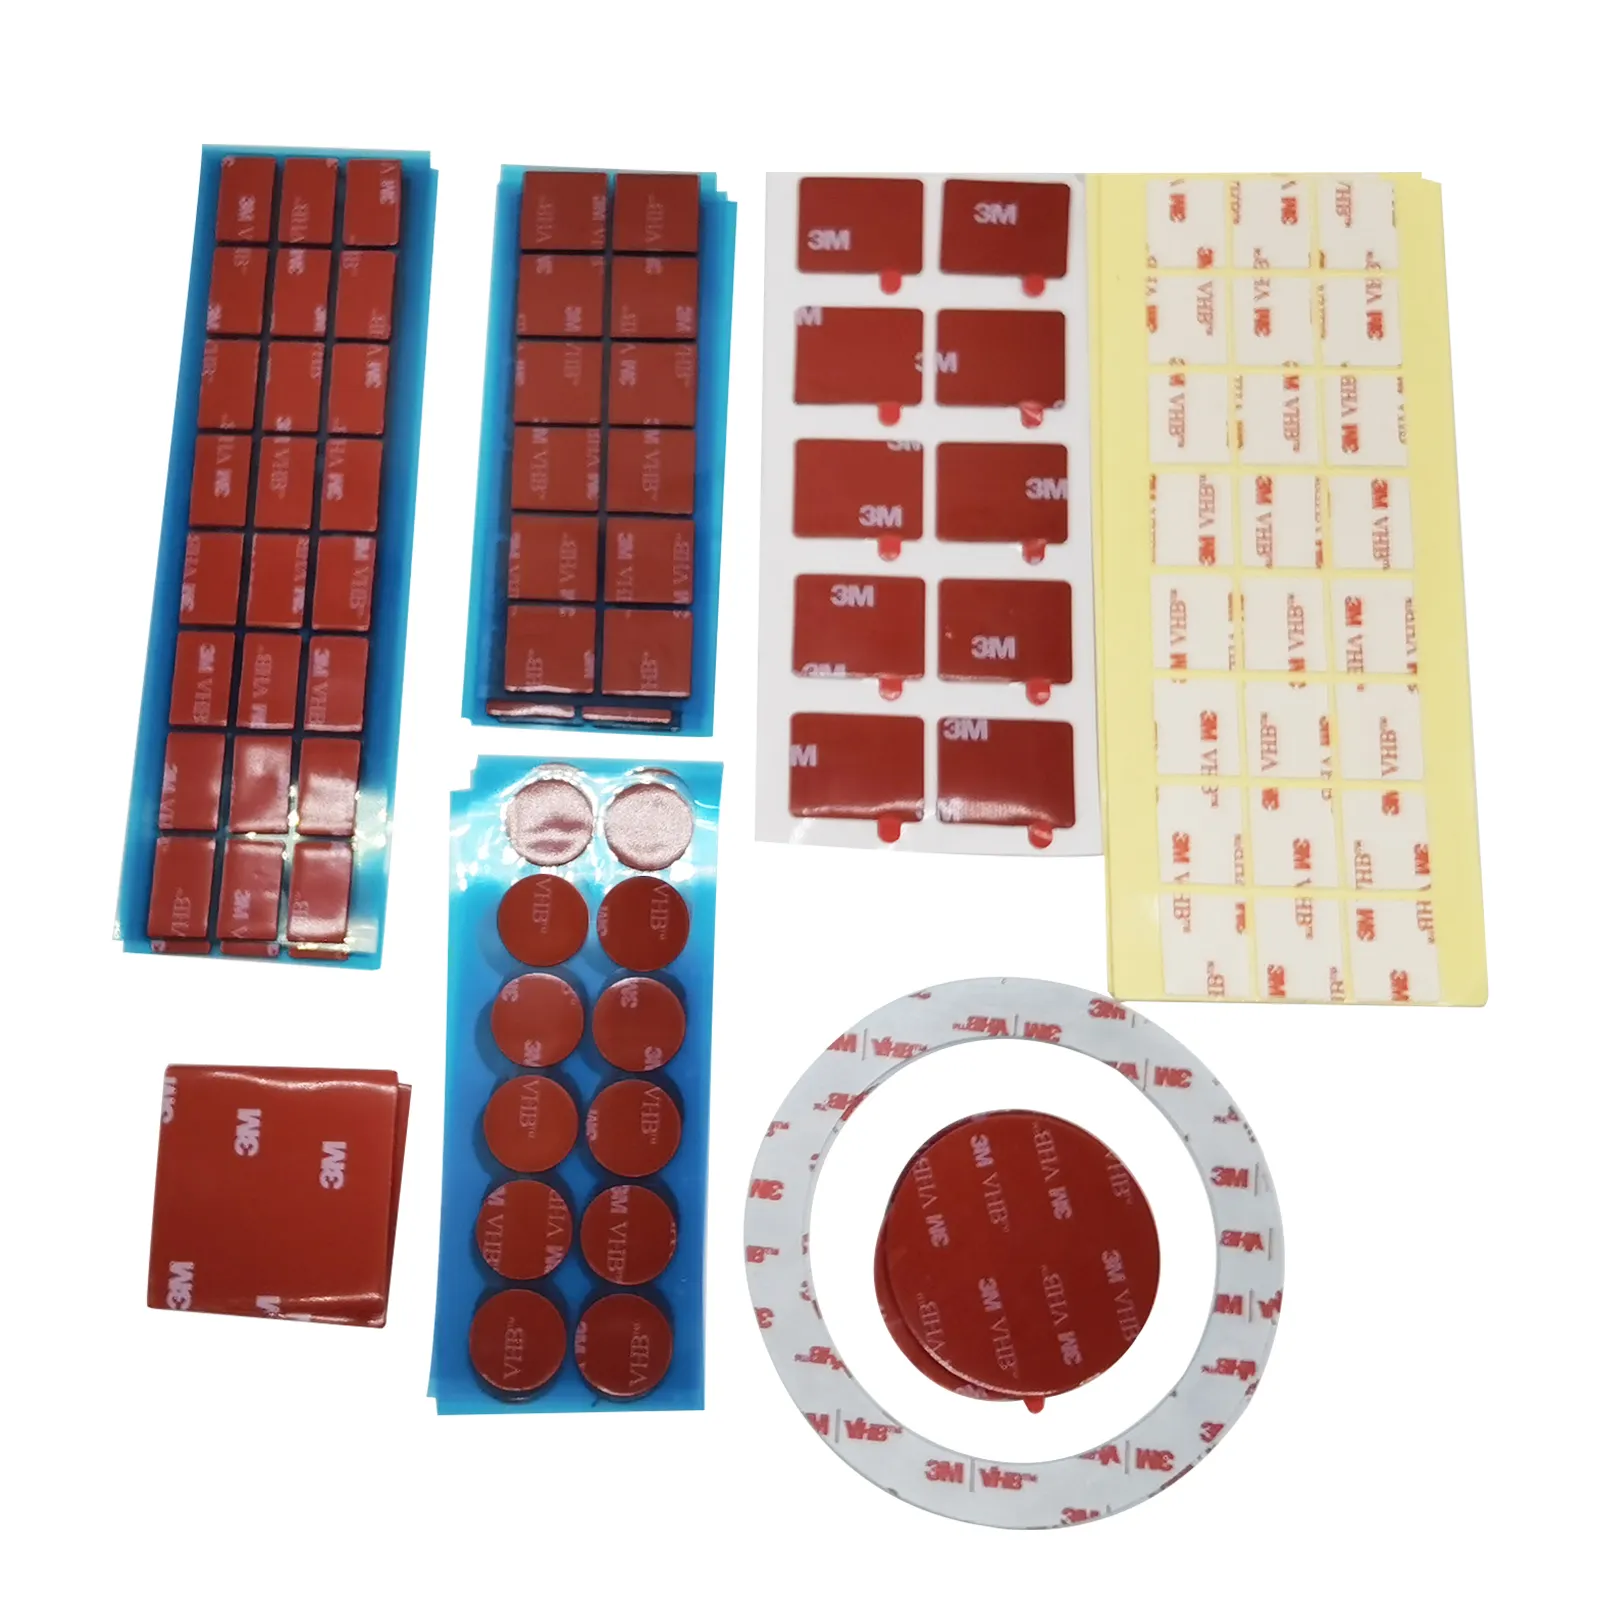 Customization Round Square Double Sided Adhesive Sheet Die Cut 3M Tape